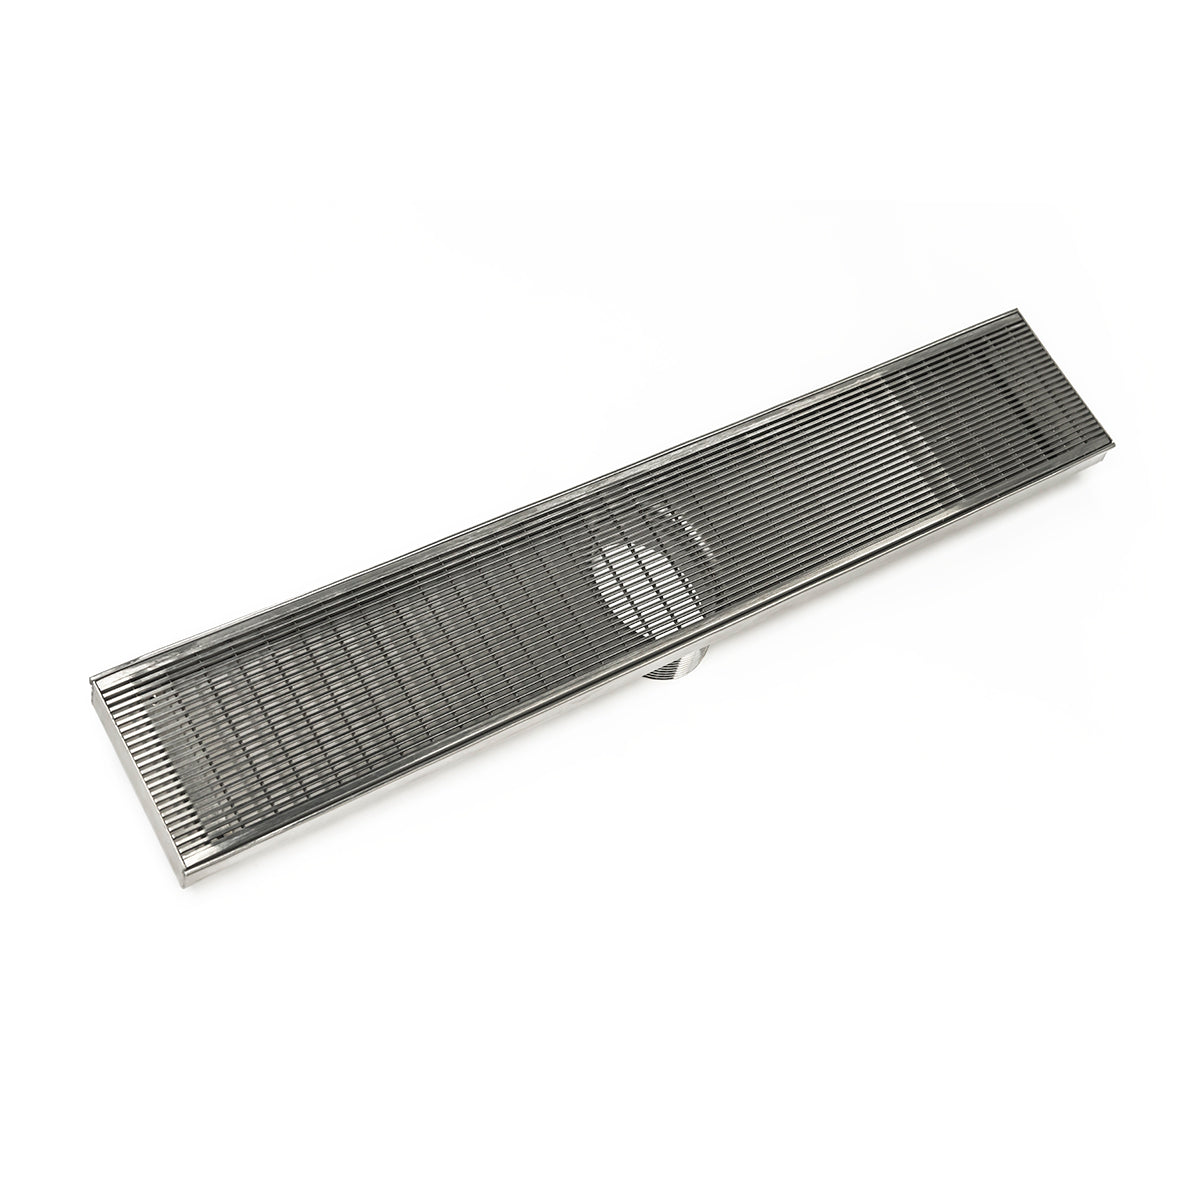 Infinity Drain 60" FX Series High Flow Fixed Length Linear Drain Kit with Wedge Wire Grate with PVC Drain Body